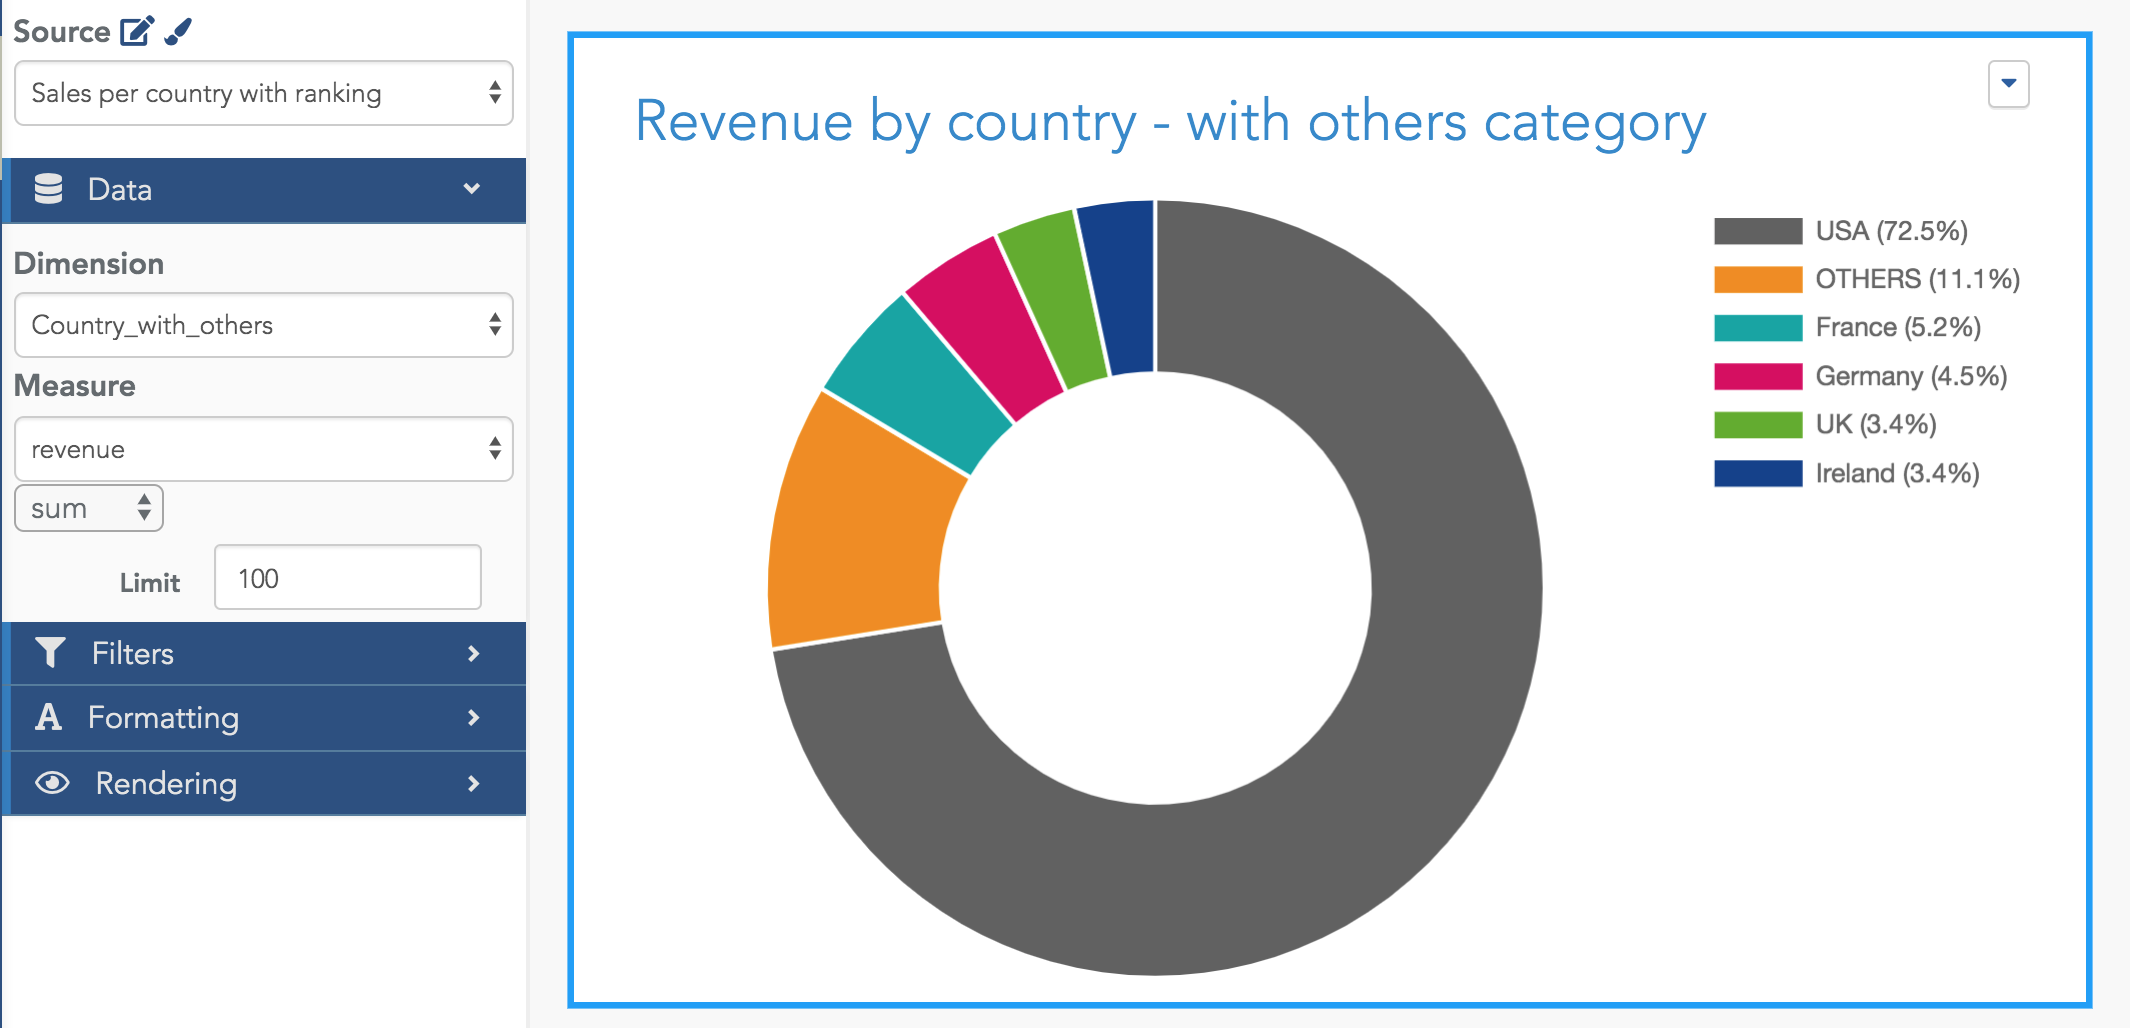 how to make a pie chart in excel of countries